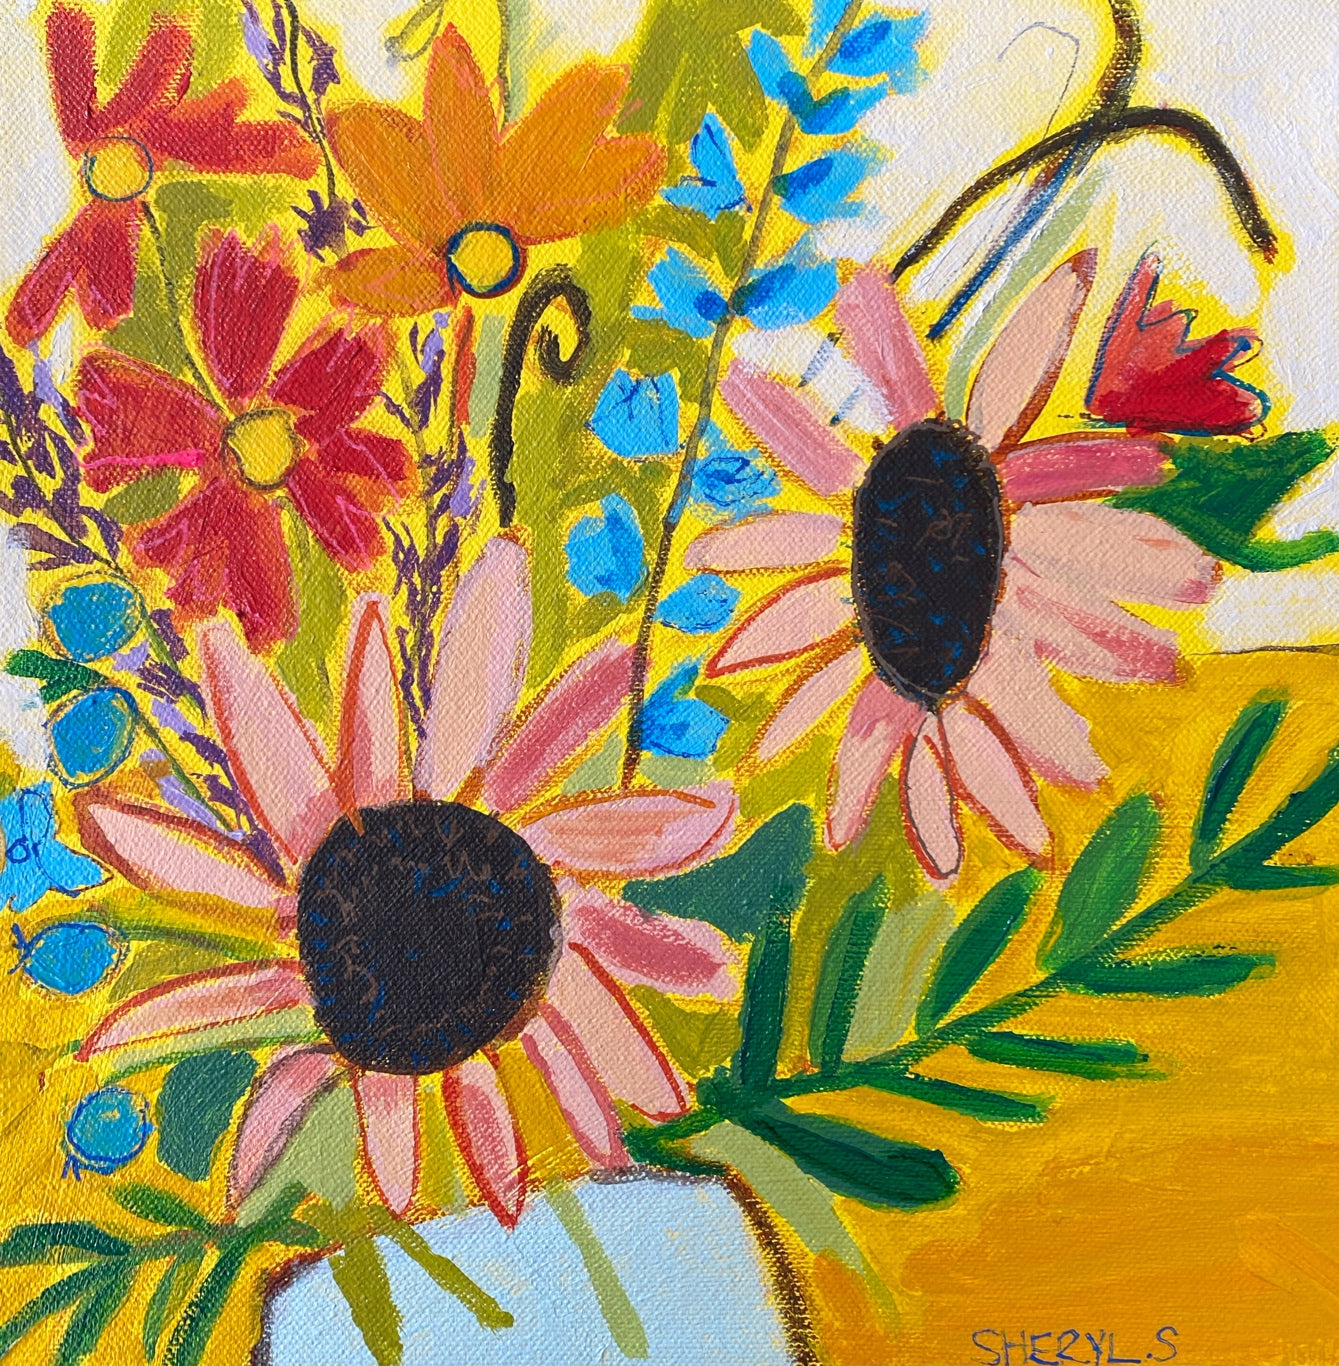 Original Wal Art / Pink Sunflowers and Cosmos / Modern Floral  Painting / 10"x10" / Yellow Pink Red Orange